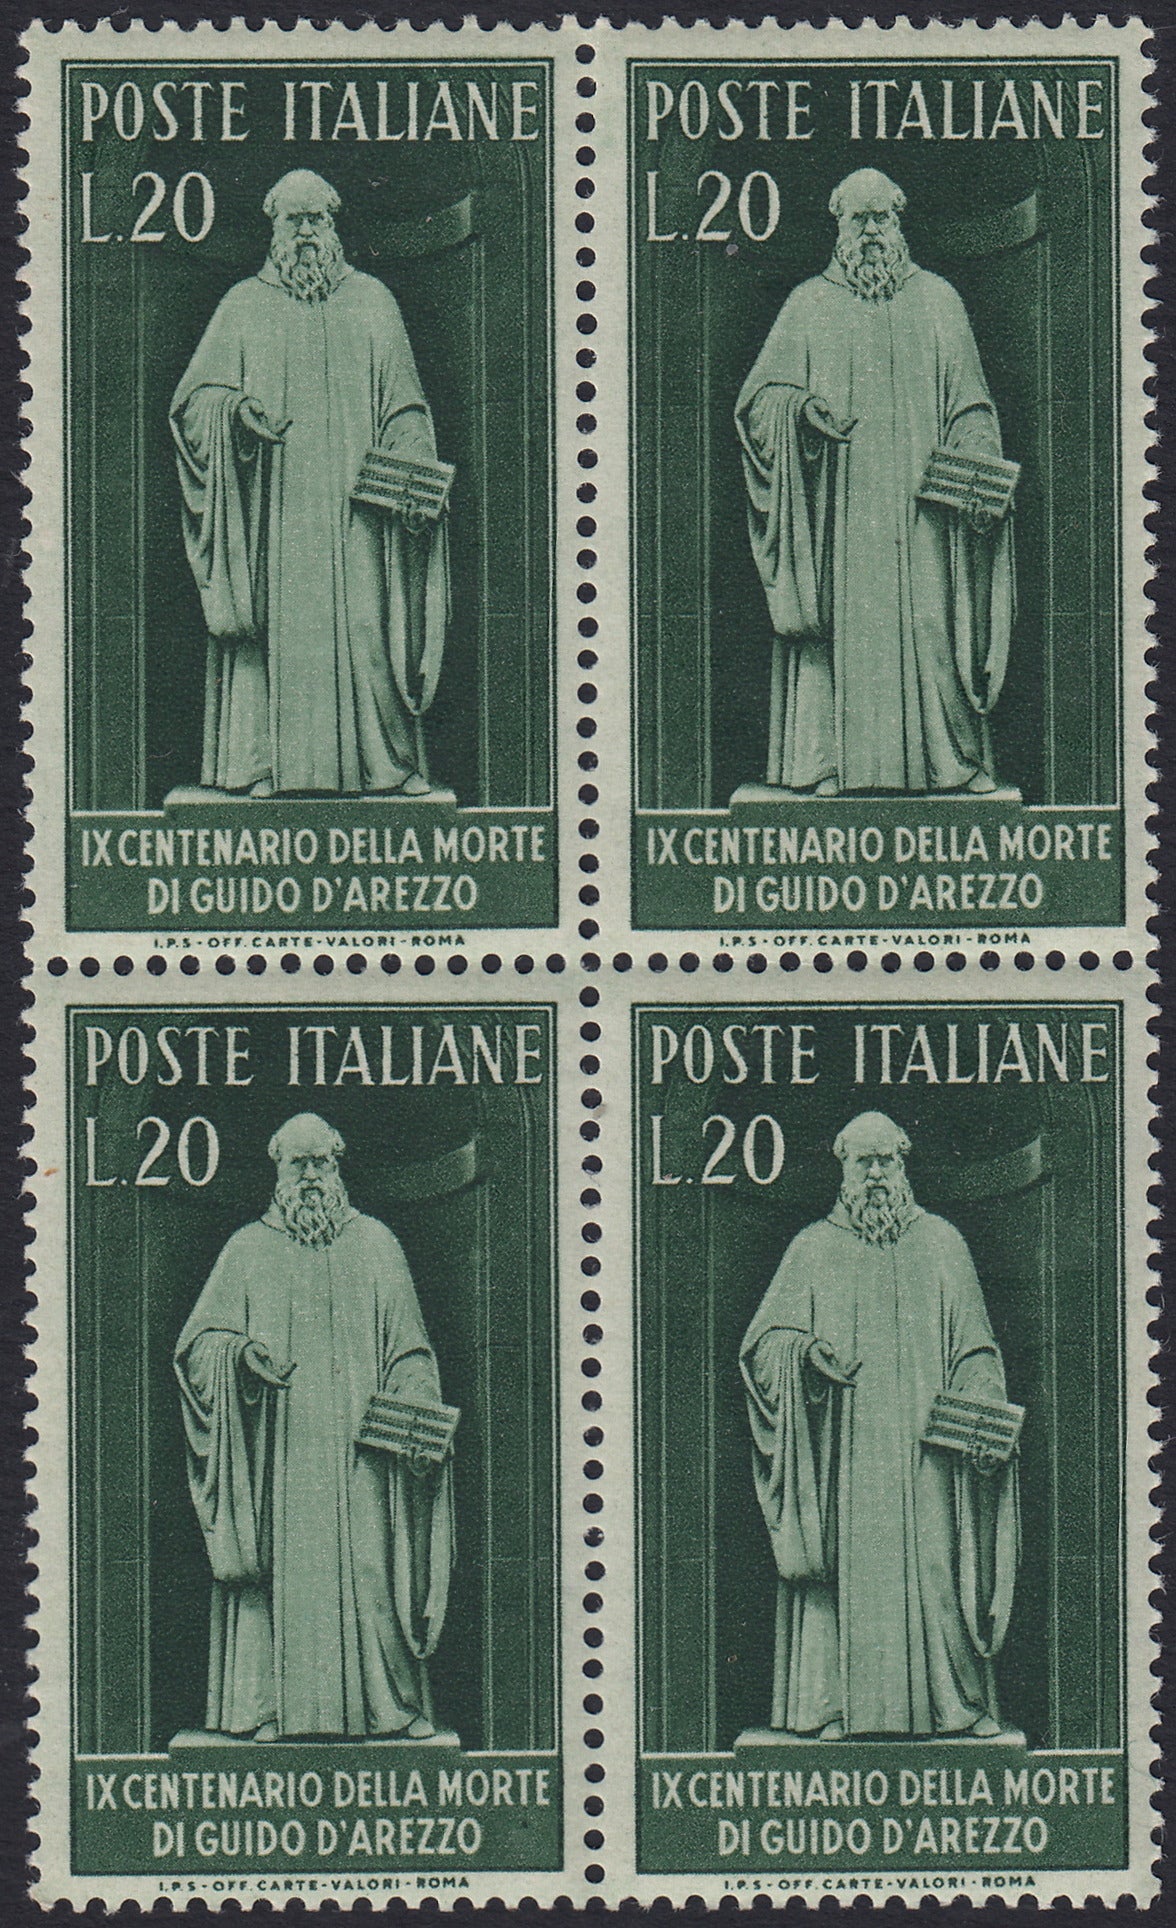 REP70 - 1950 - Winged wheel watermark, Guido d'Arezzo, L. 20 dark green in block of new, intact rubber (626)